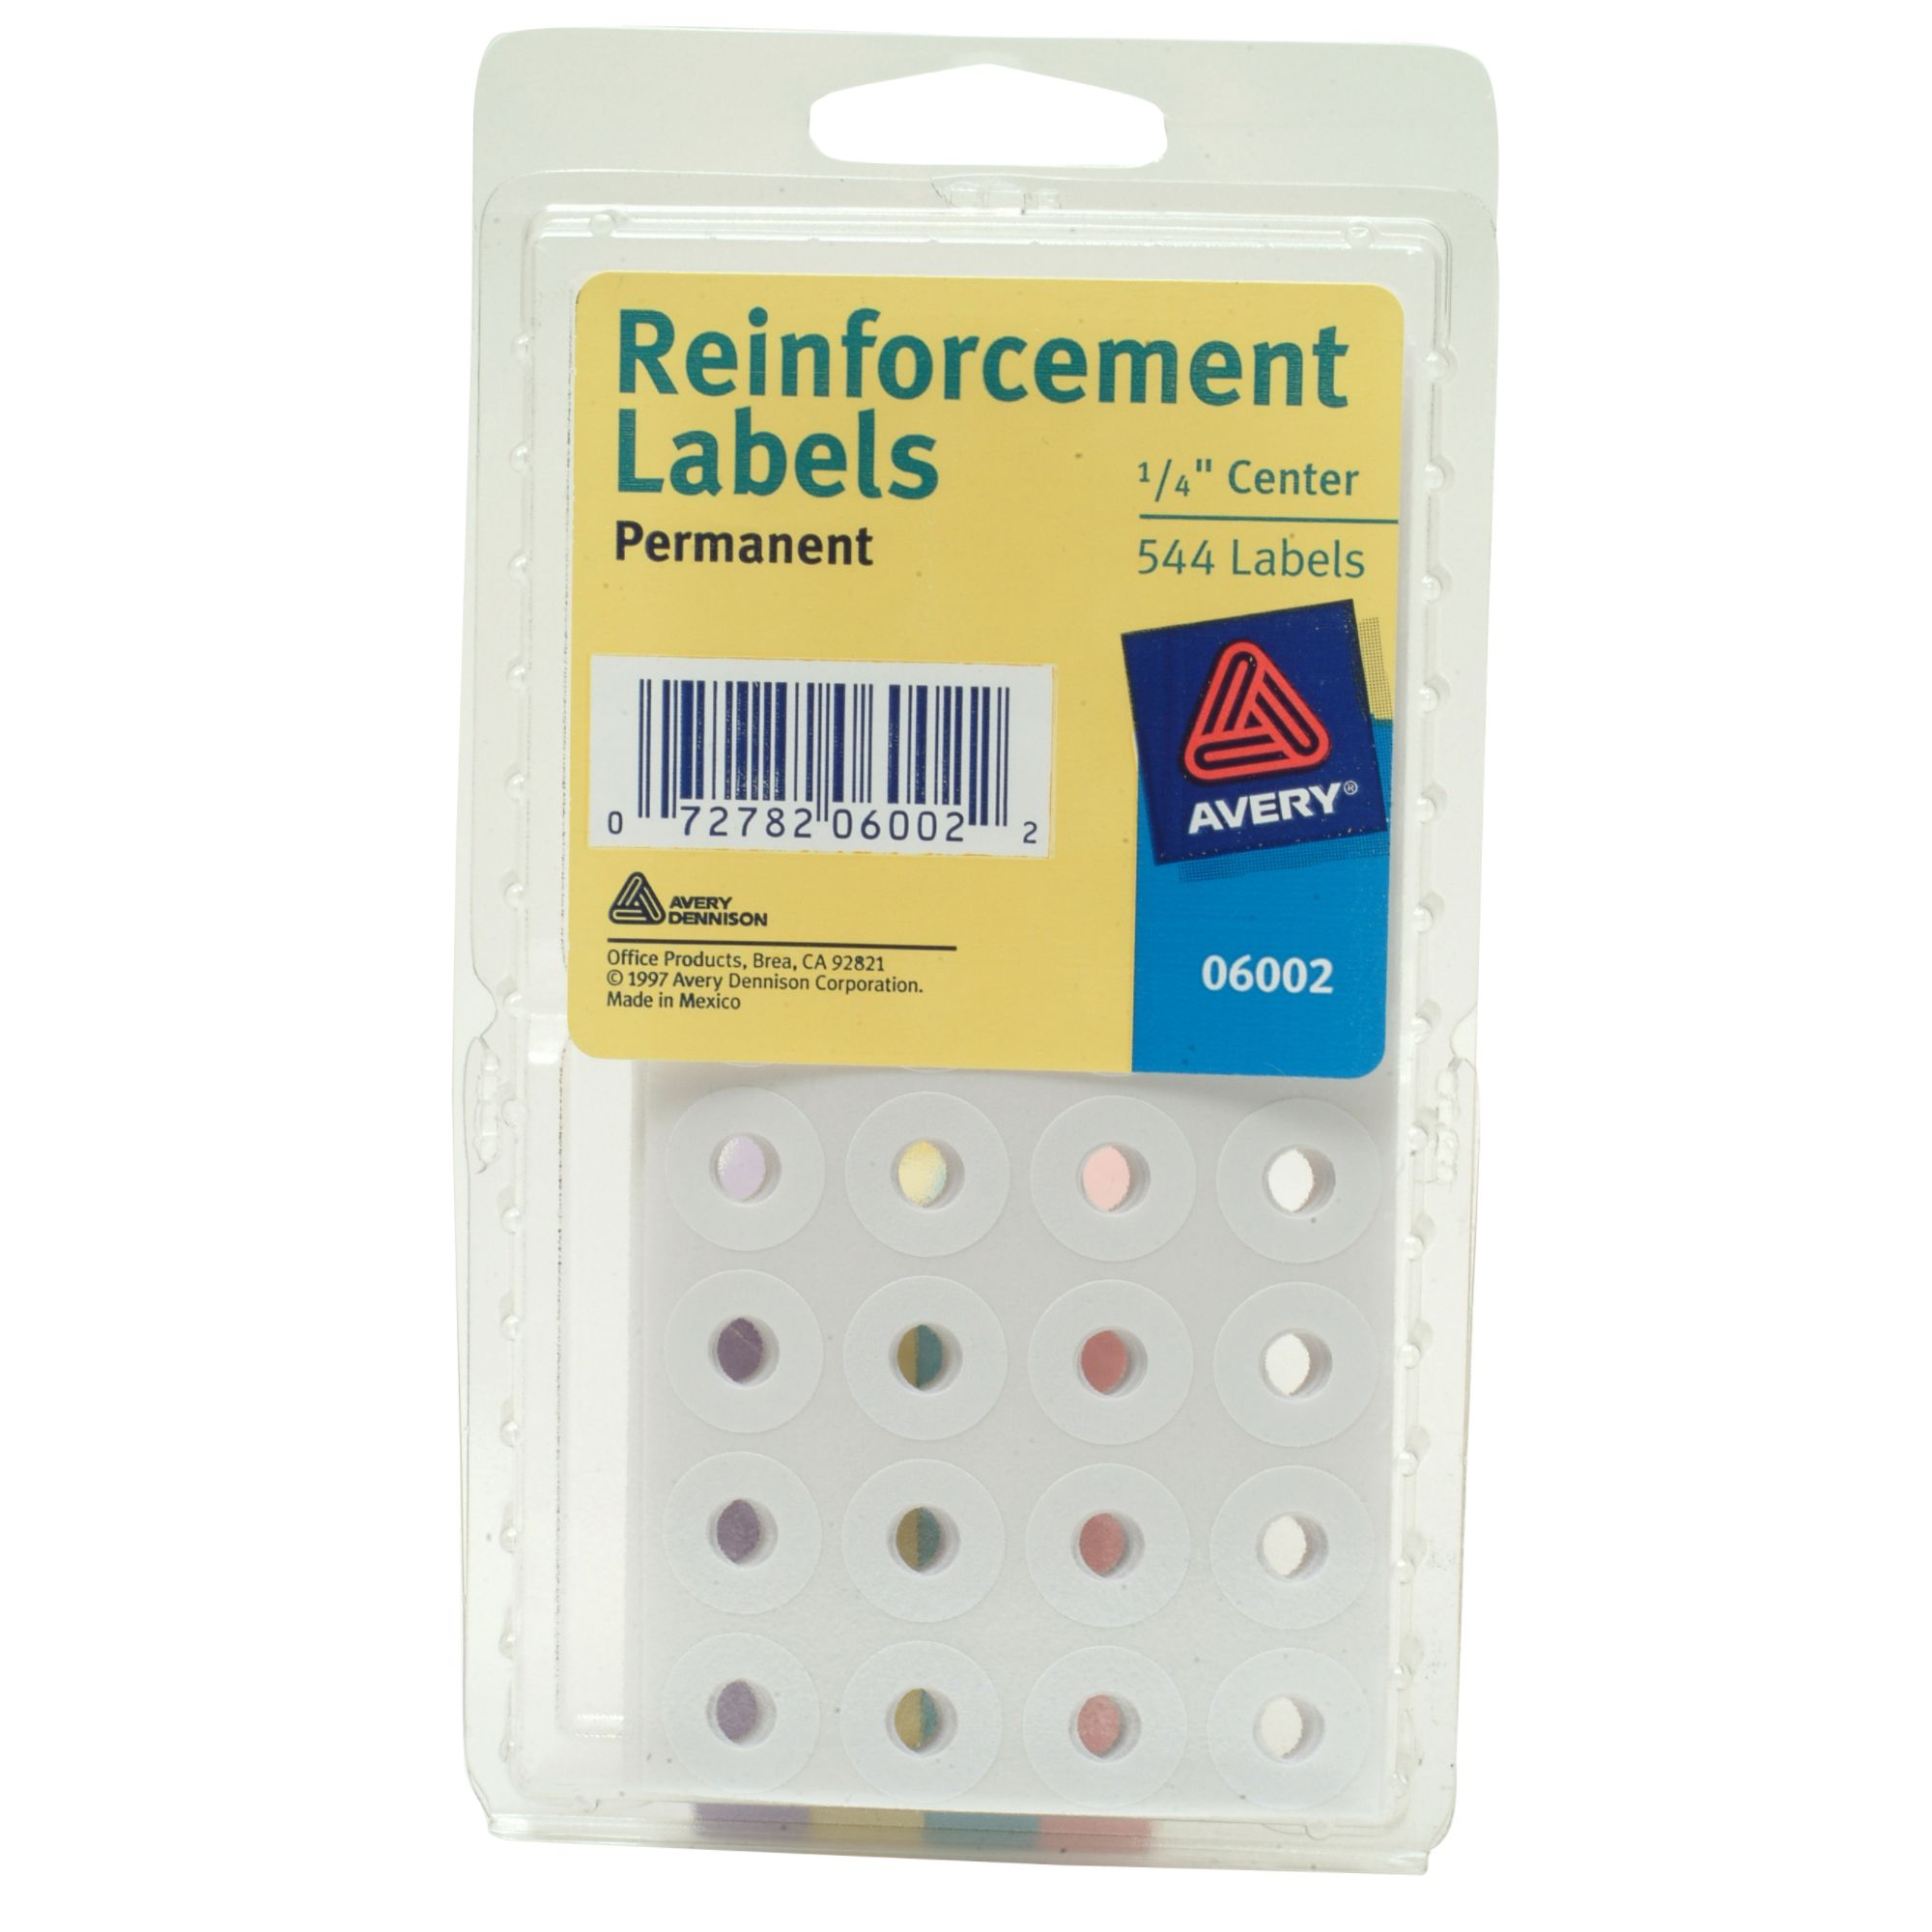 Avery 25744611 Reinforcements 544 ct Self-Adhesive